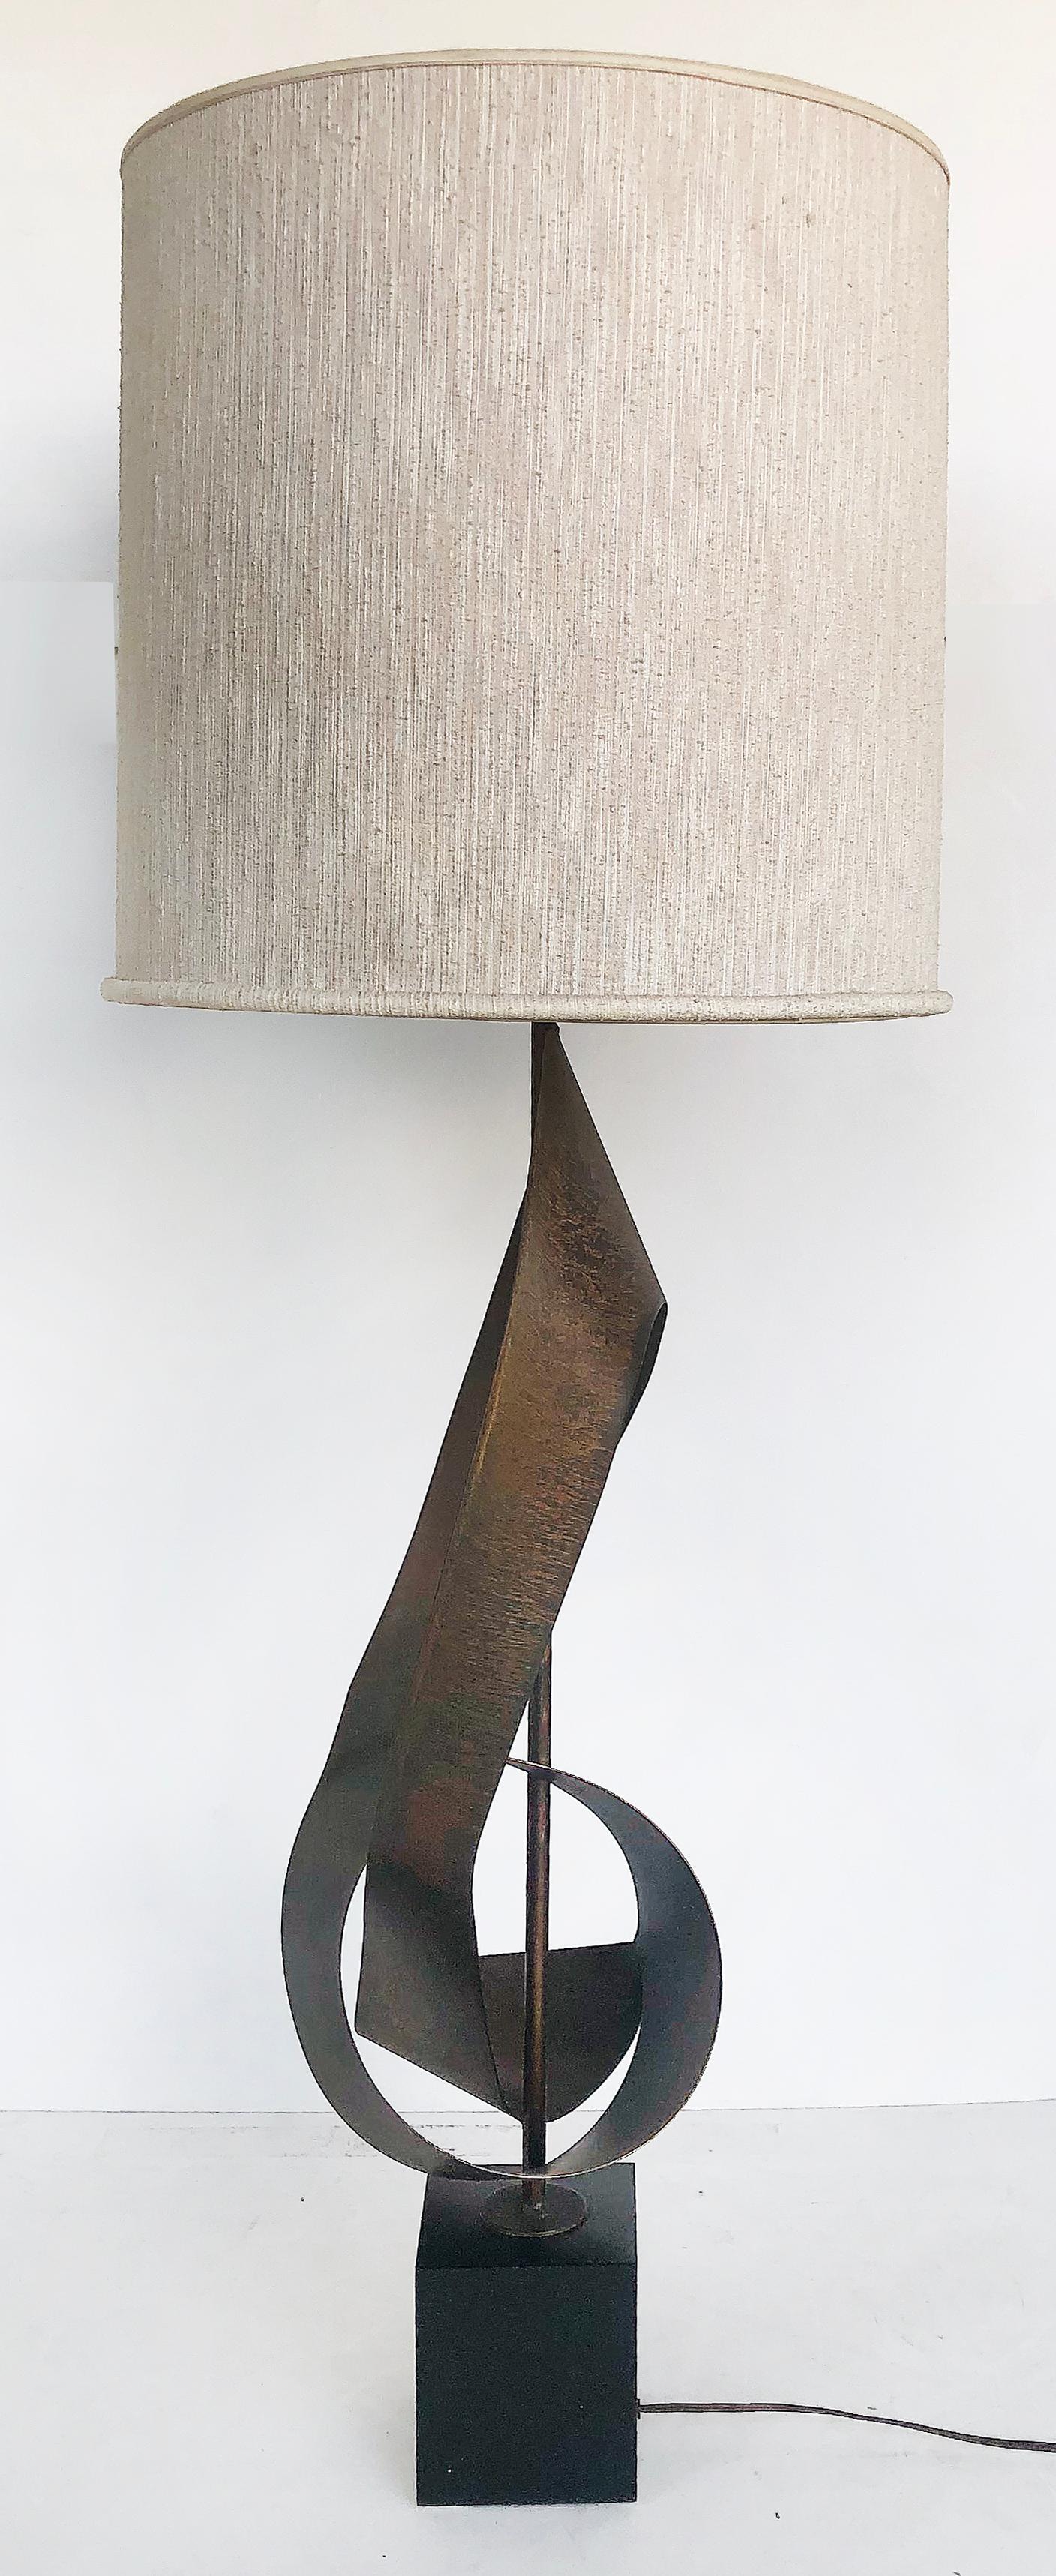 Mid-century Harry Balmer Laurel Brutalist ribbon lamp

Offered is a Mid-Century Modern Harry Balmer for Laurel Lamp Co. over-sized Brutalist torch-cut ribbon lamp. The lamp has original wiring in good, working condition and accommodates a standard